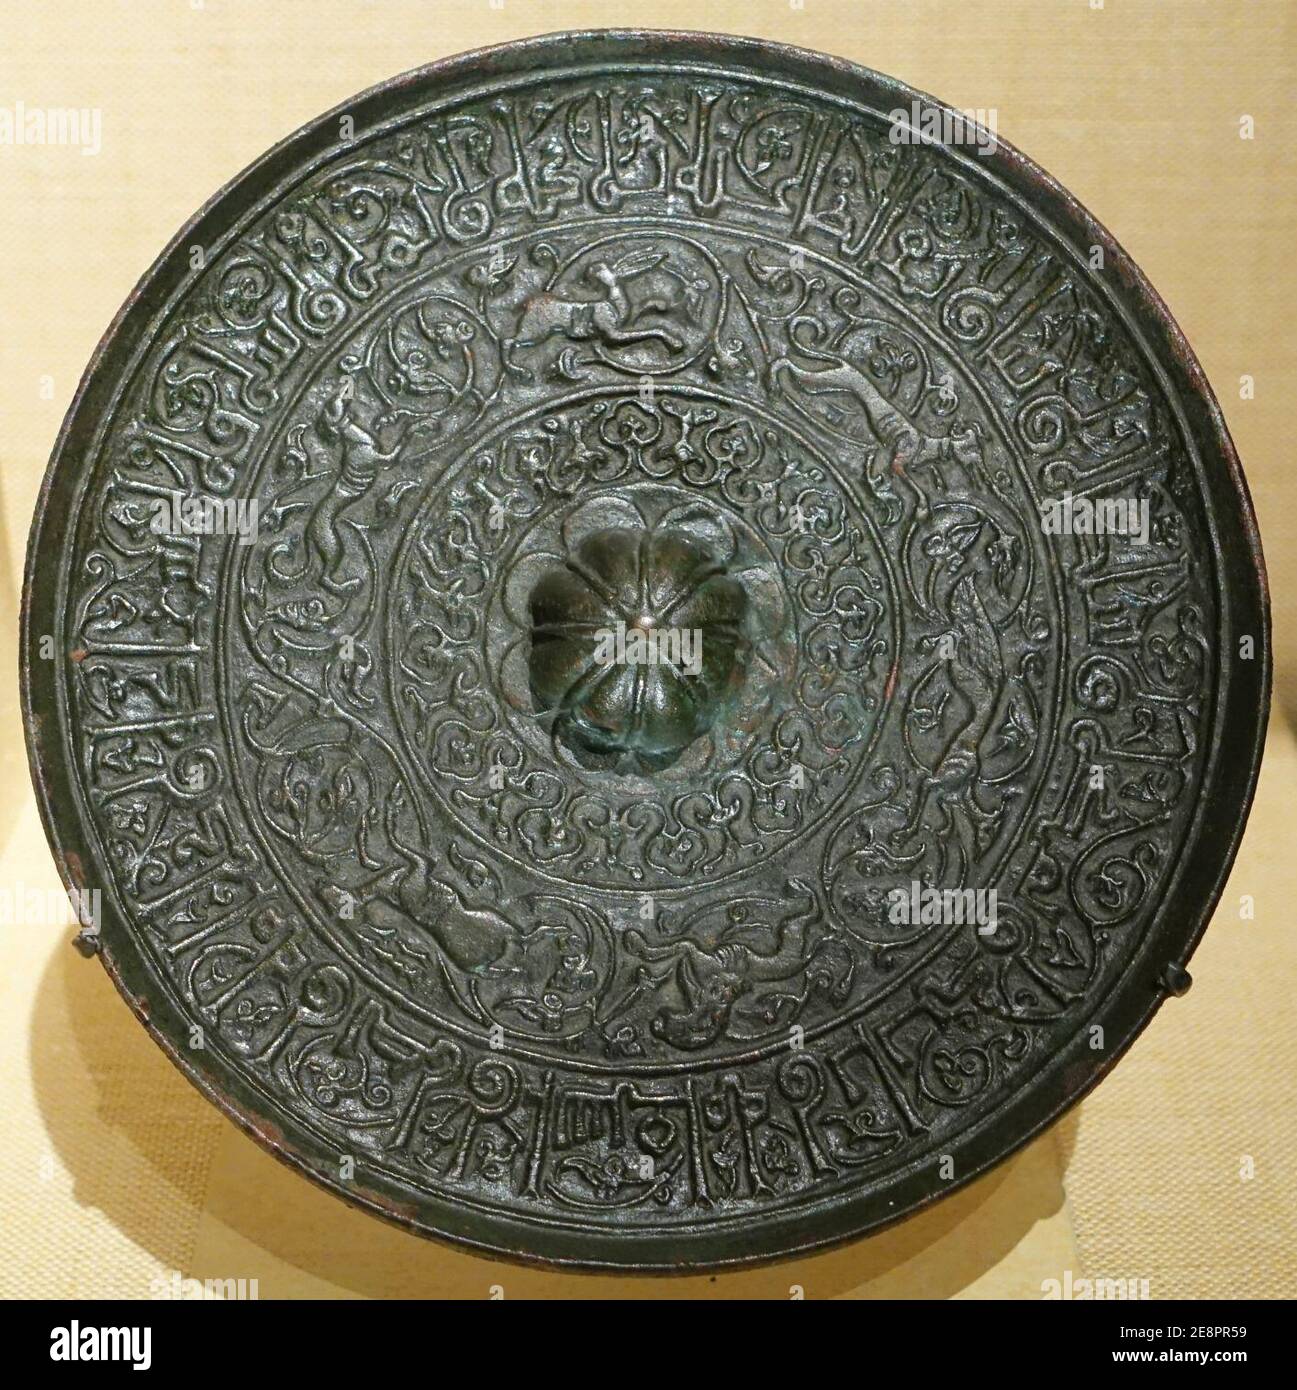 Mirror inspired by Chinese models, Iran, Seljuq period, 1100s AD, bronze, 42.136 Stock Photo